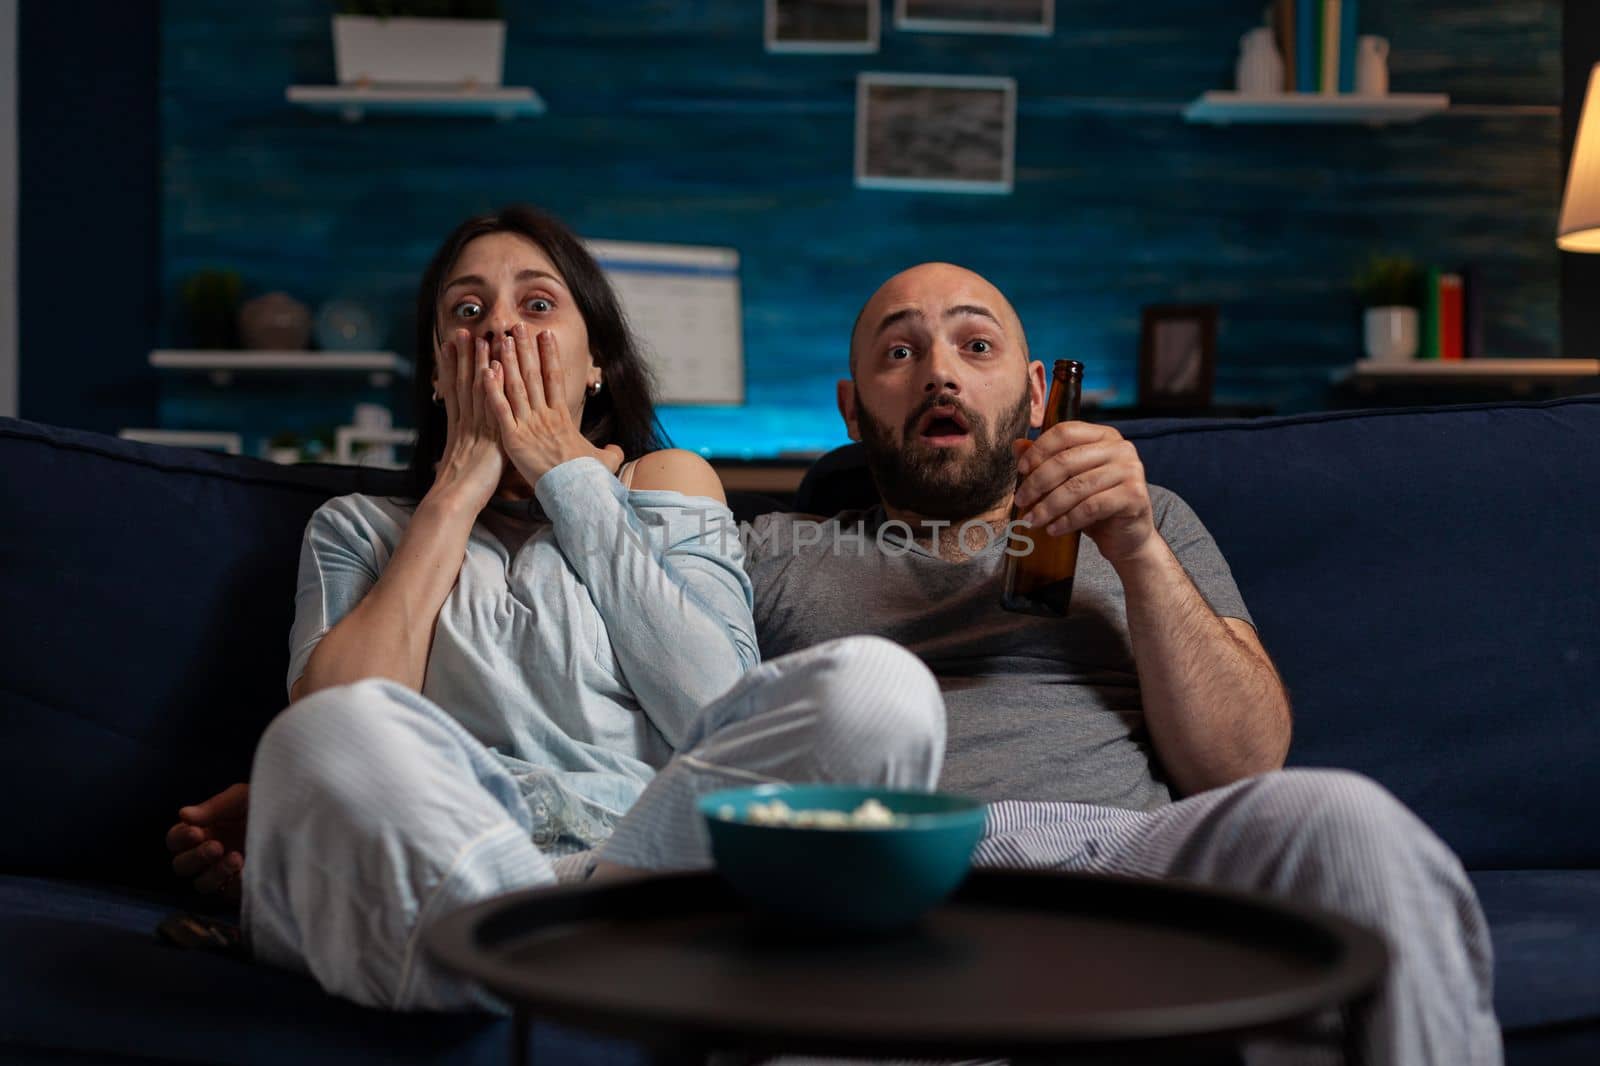 POV of afraid couple watching scary movie on television program, drinking beer and eating popcorn. Man and woman feeling shocked, surprised and terrified looking at horror film on TV.